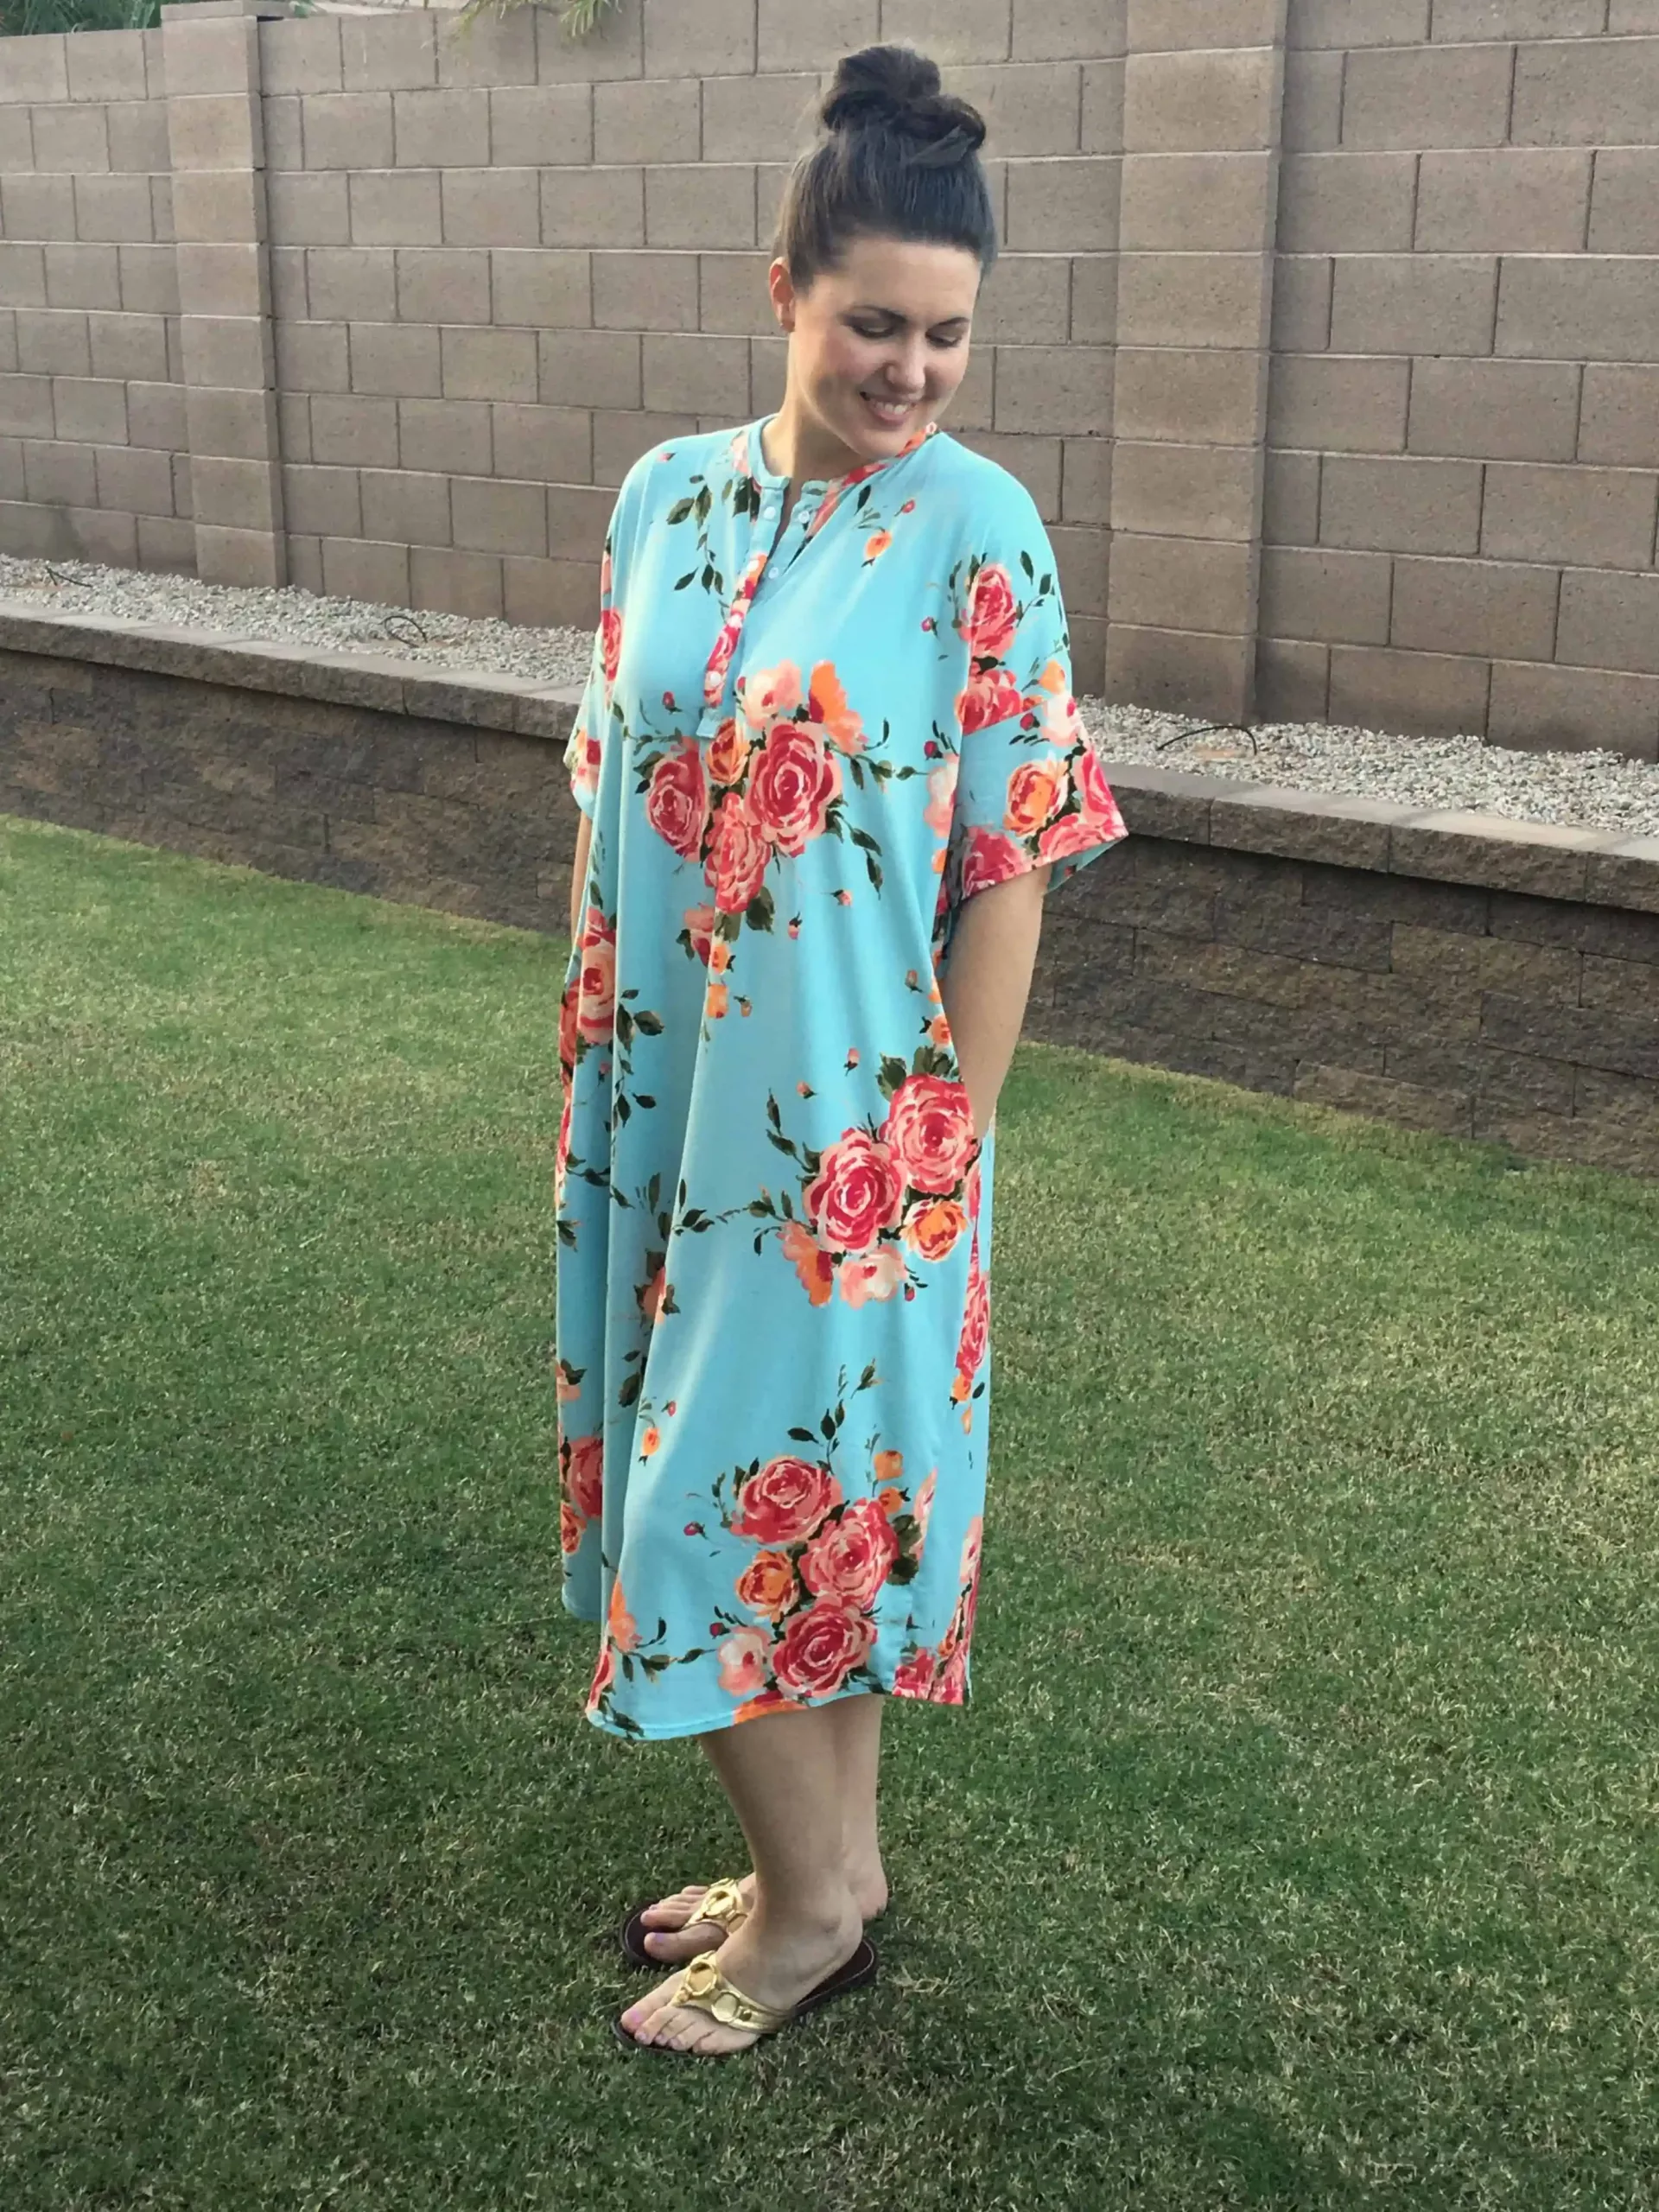 Embrace Comfort And Style With The Mara Lounge Dress - Women's One Size PDF Sewing Pattern!